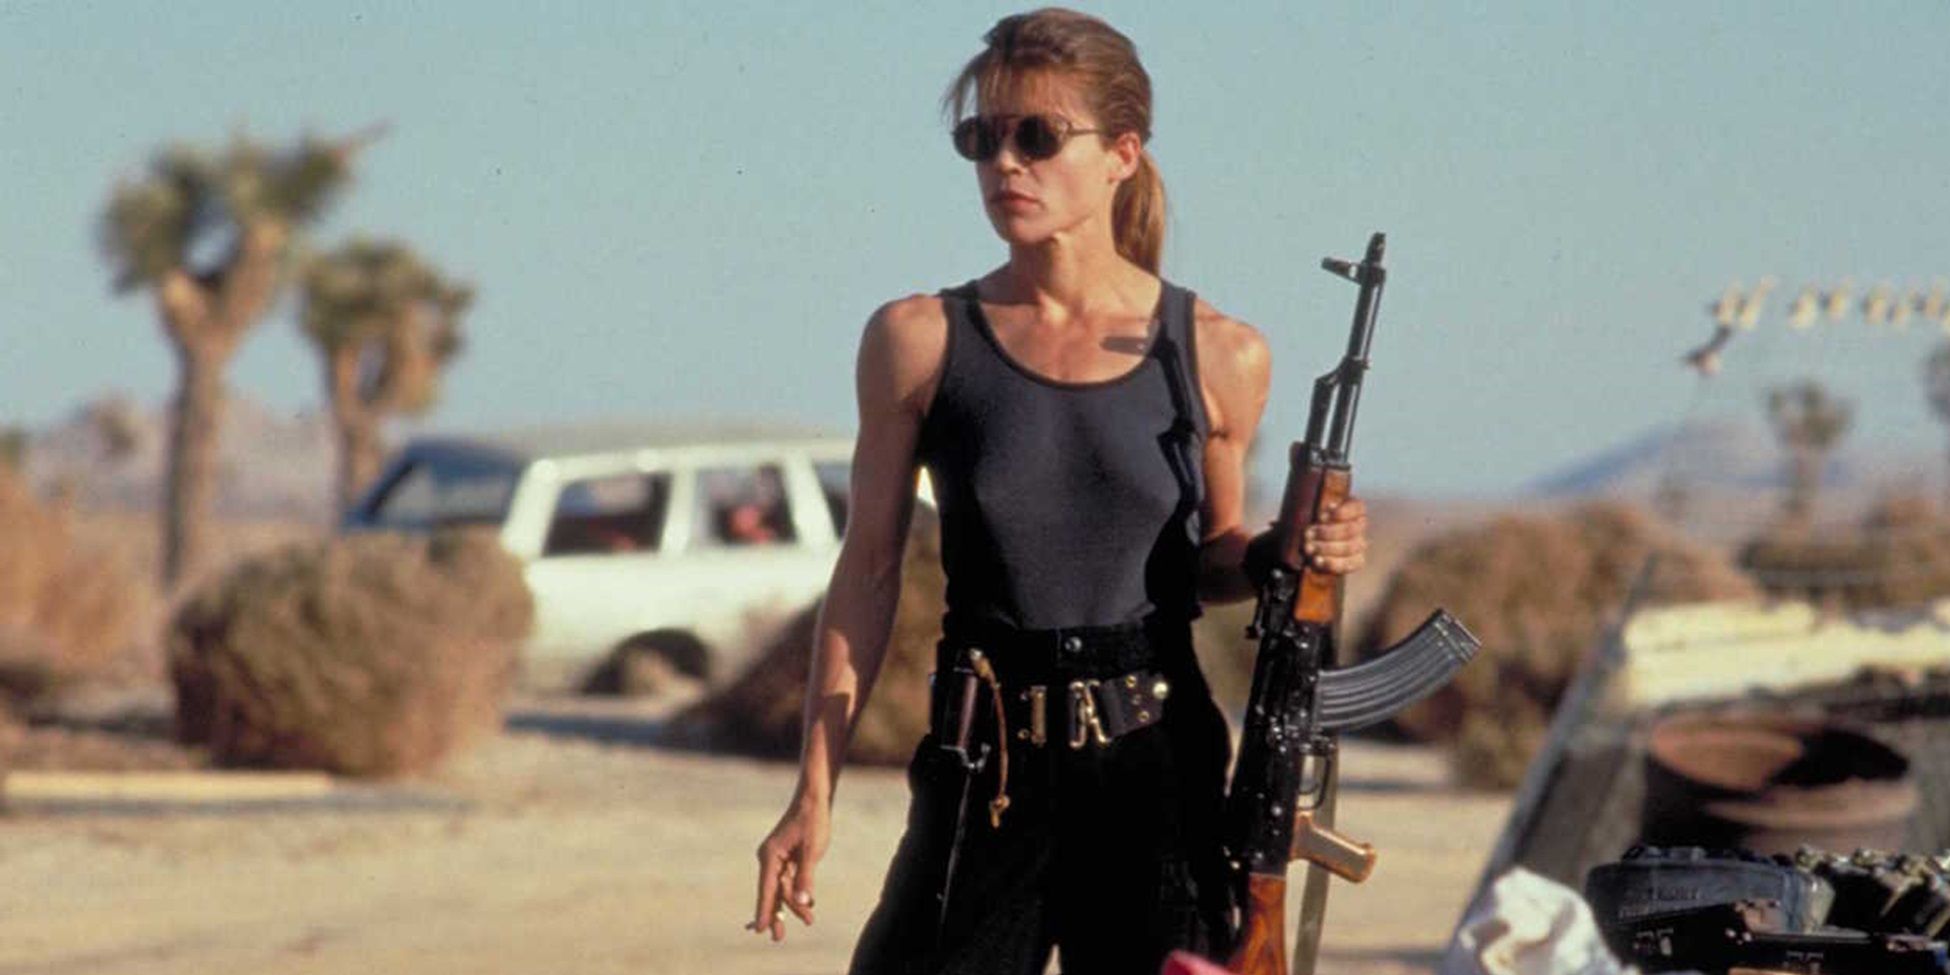 Linda Hamilton Sarah Connor in the desert with an assault rifle in Terminator 2 Judgment Day